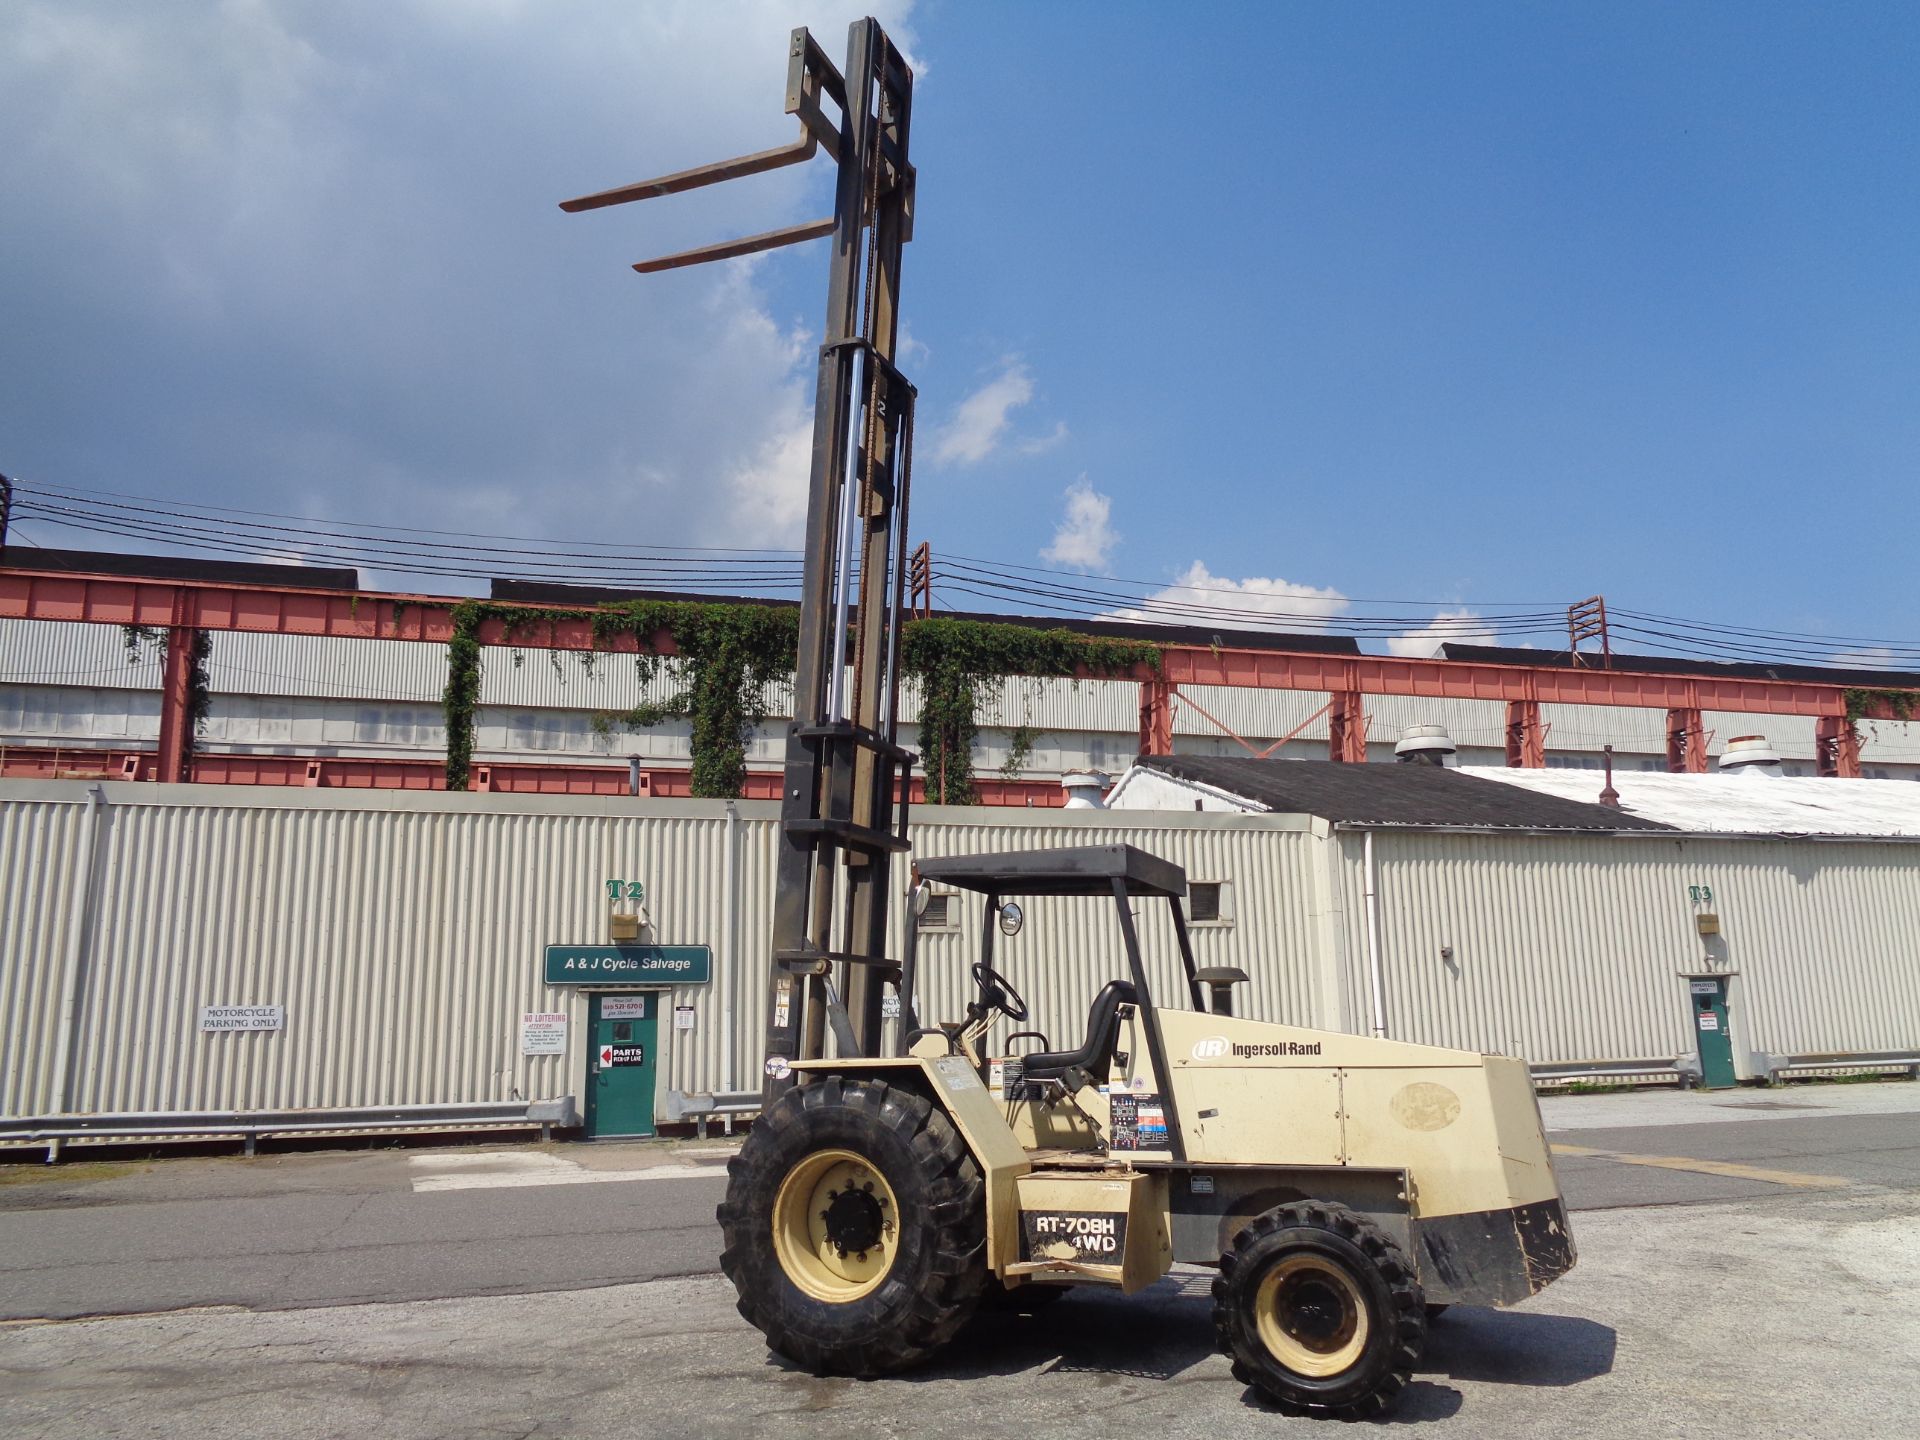 2005 Ingersoll Rand RT708H 8,000lb Rough Terrain Forklift - Only 455 hours - Image 16 of 19